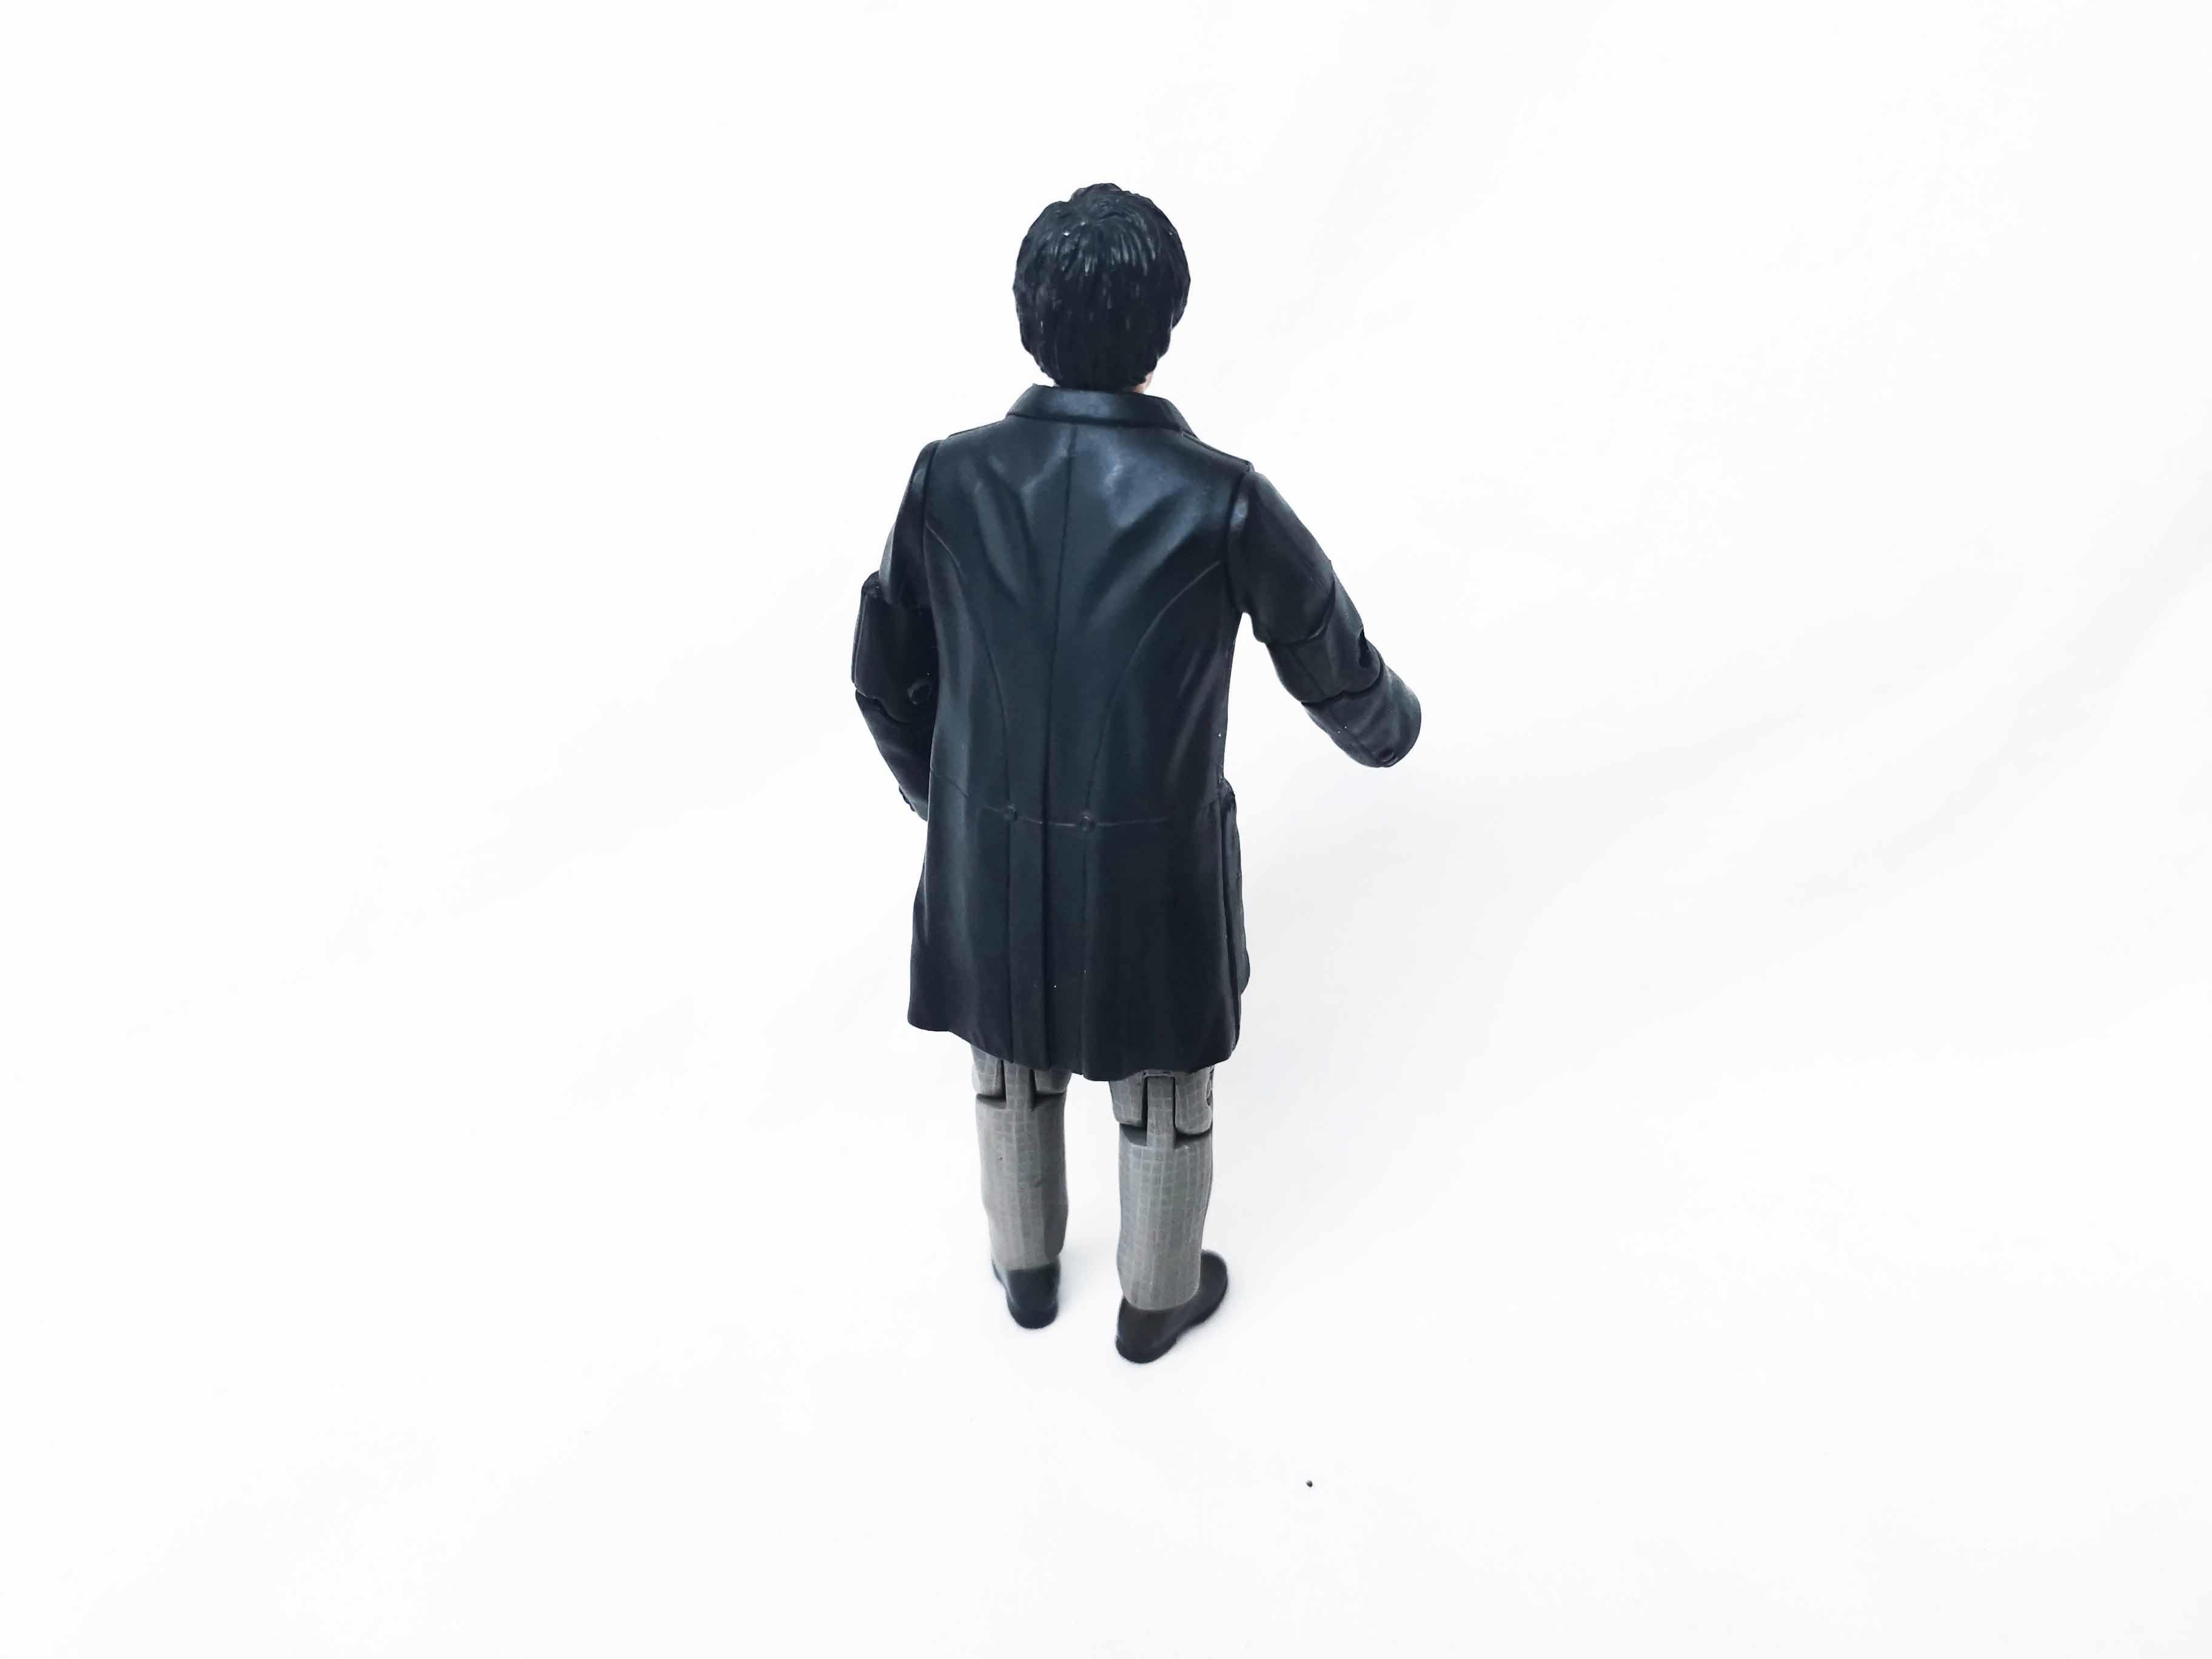 Doctor Who 2nd Doctor Patrick Troughton Action Figure Doctor Who 5